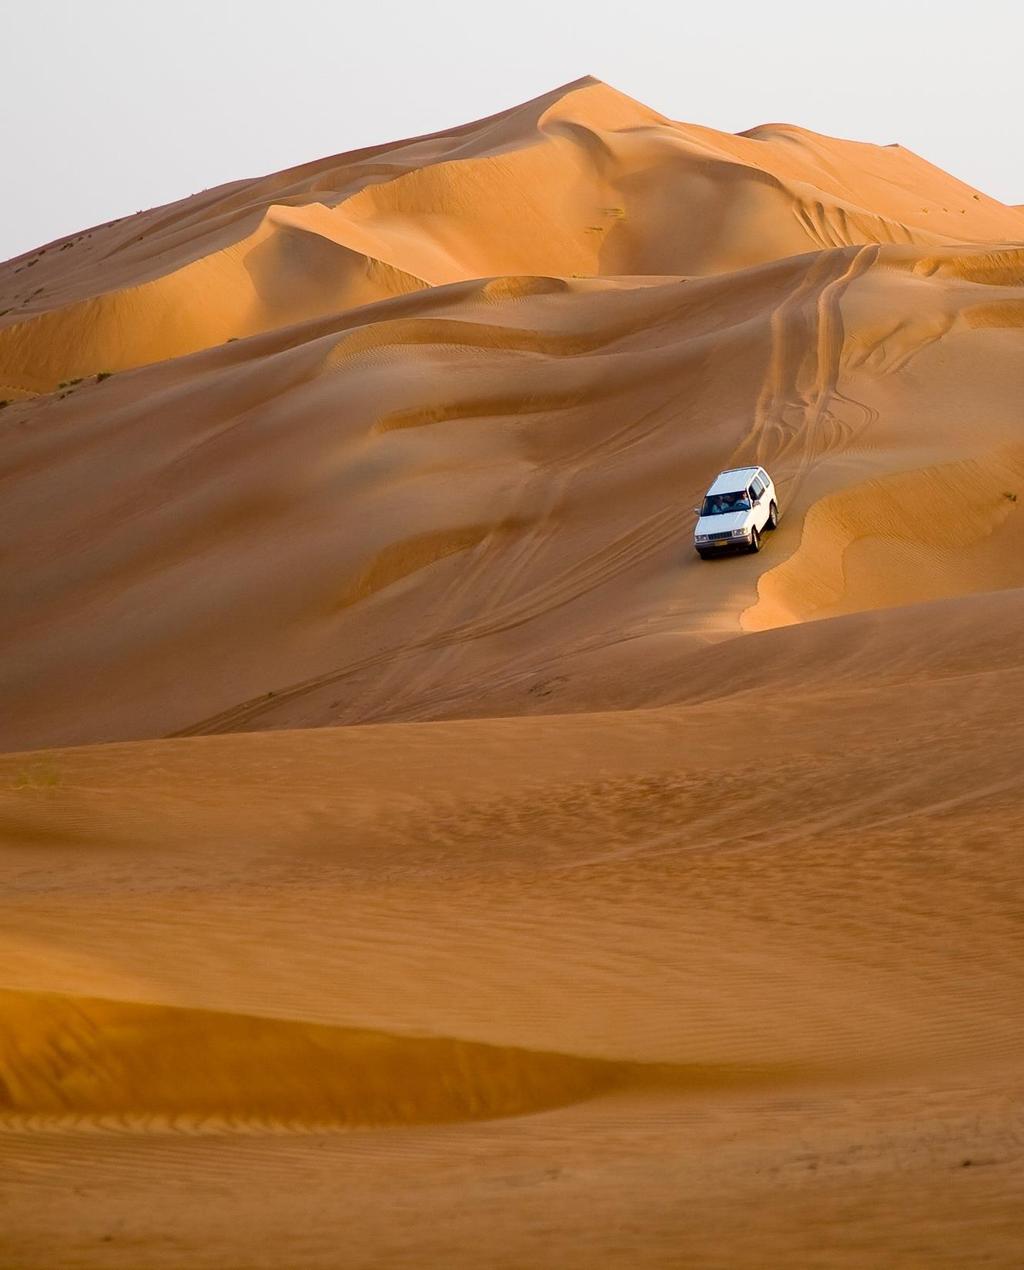 BE MESMORISED BY THE WAHIBA SANDS A trip into the Wahiba (or Sharqiya) Sands is the perfect way to get taste of storybook Arabian desert.